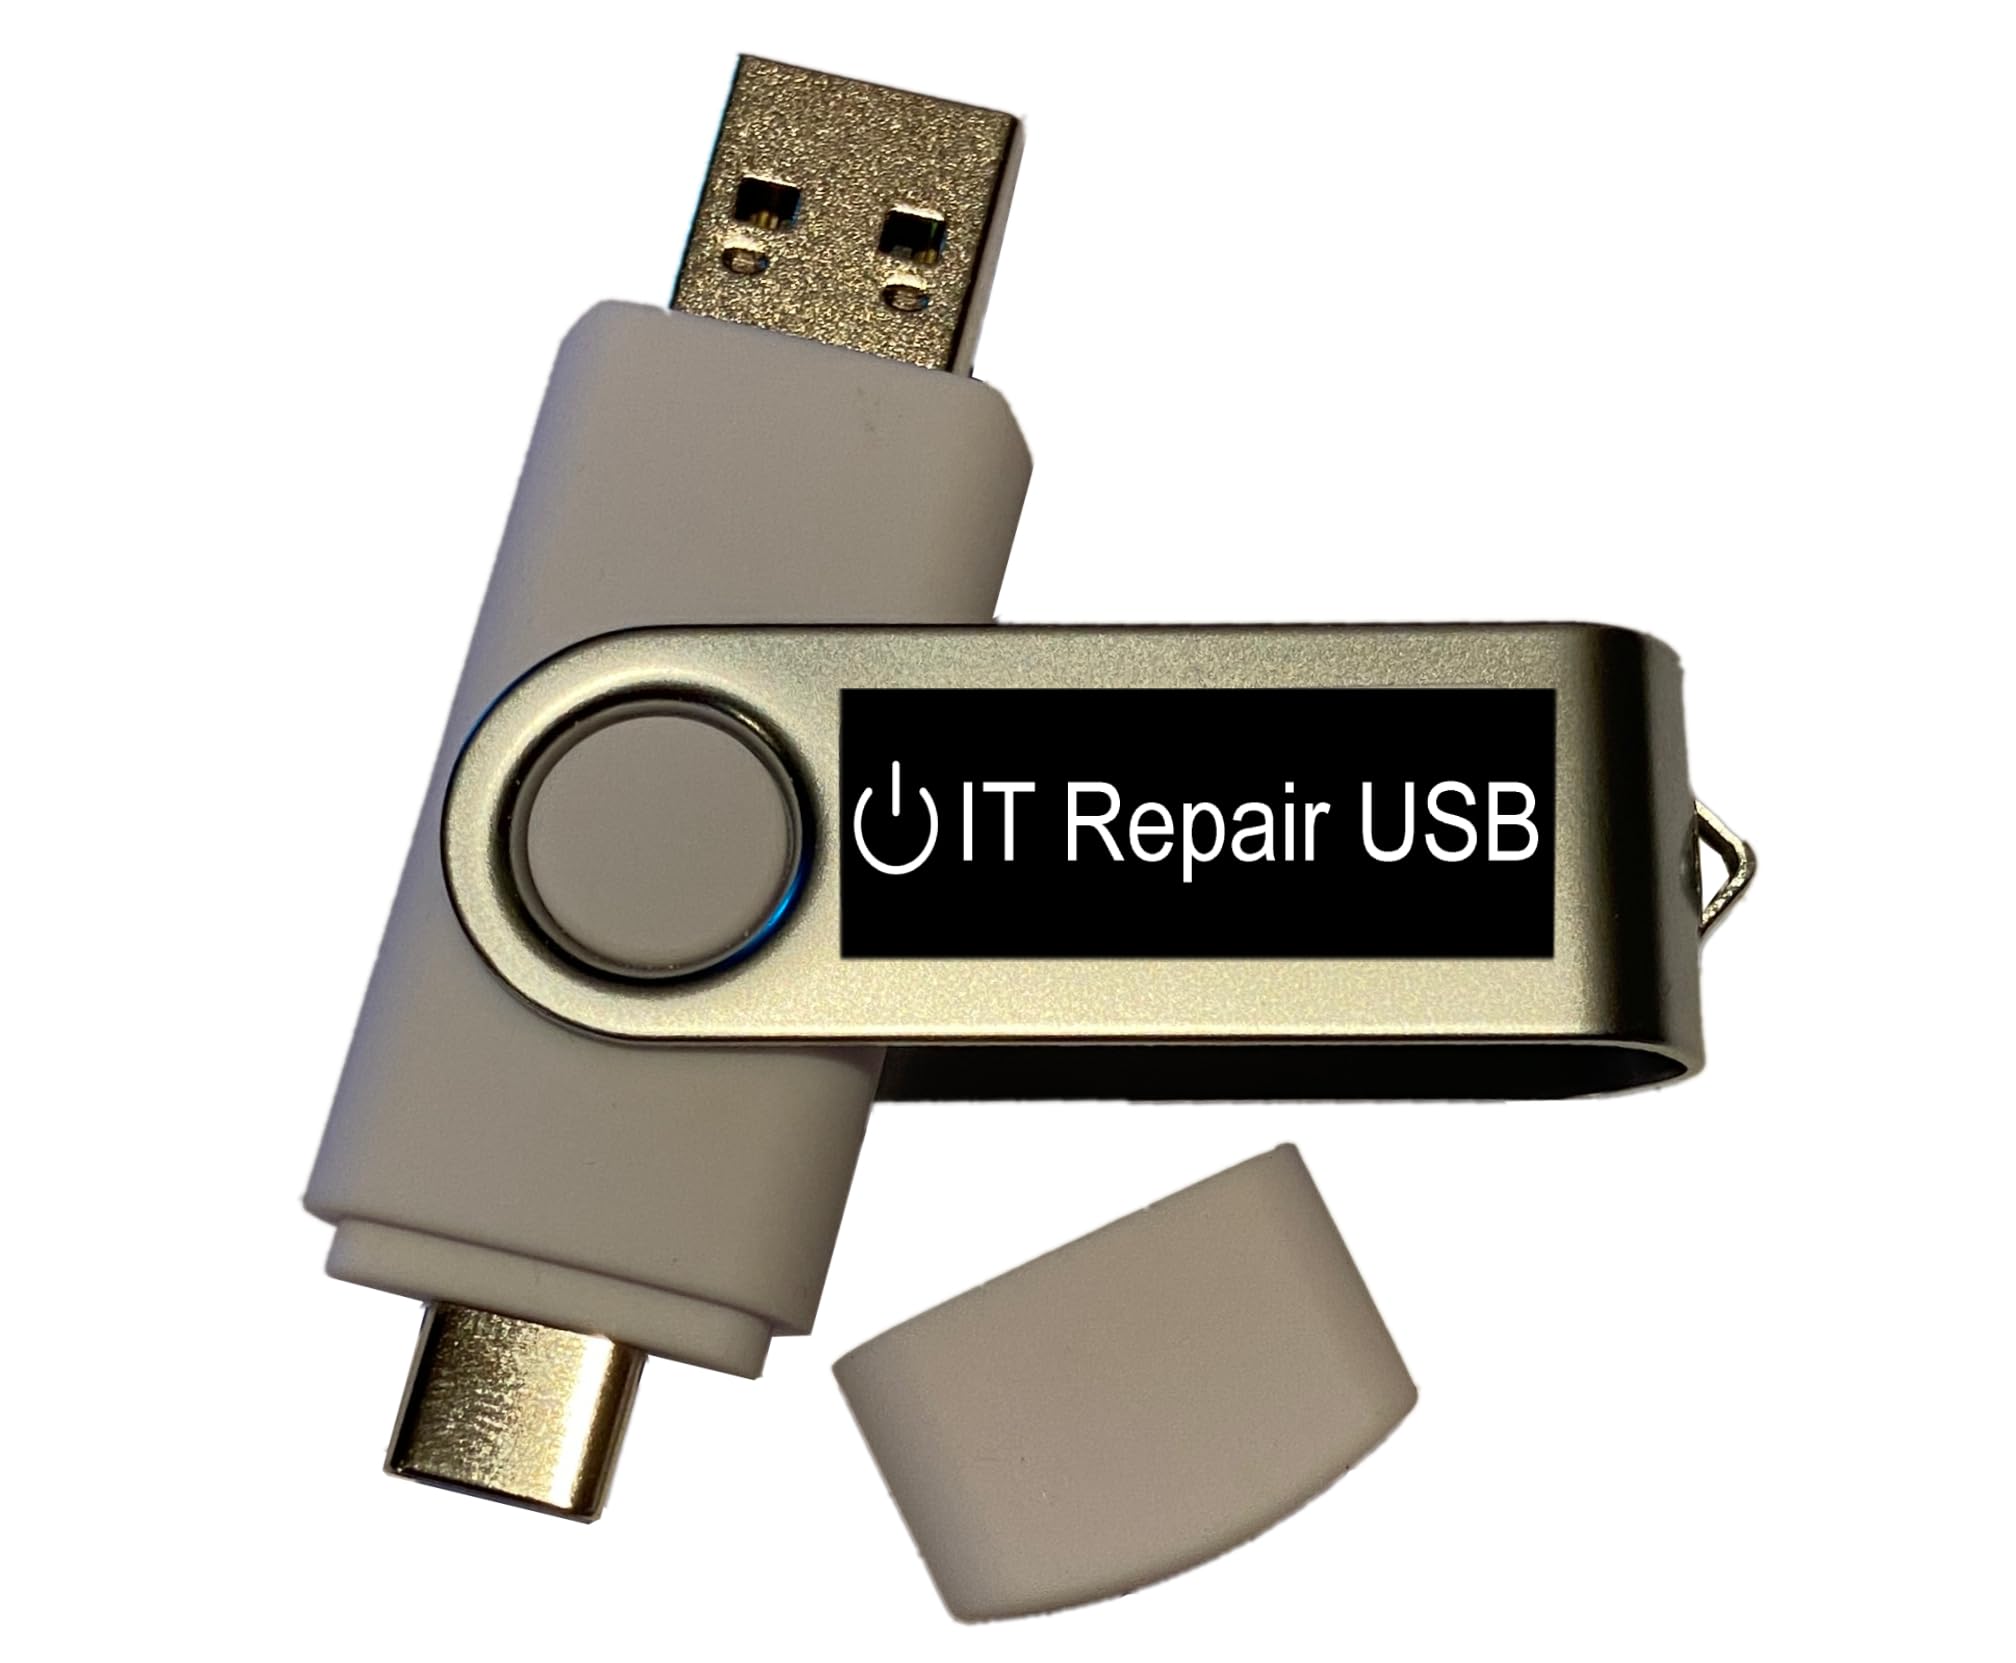 Ensure that the USB drive is properly connected to your computer.
Try using a different USB port on your computer to see if the issue is with the port.